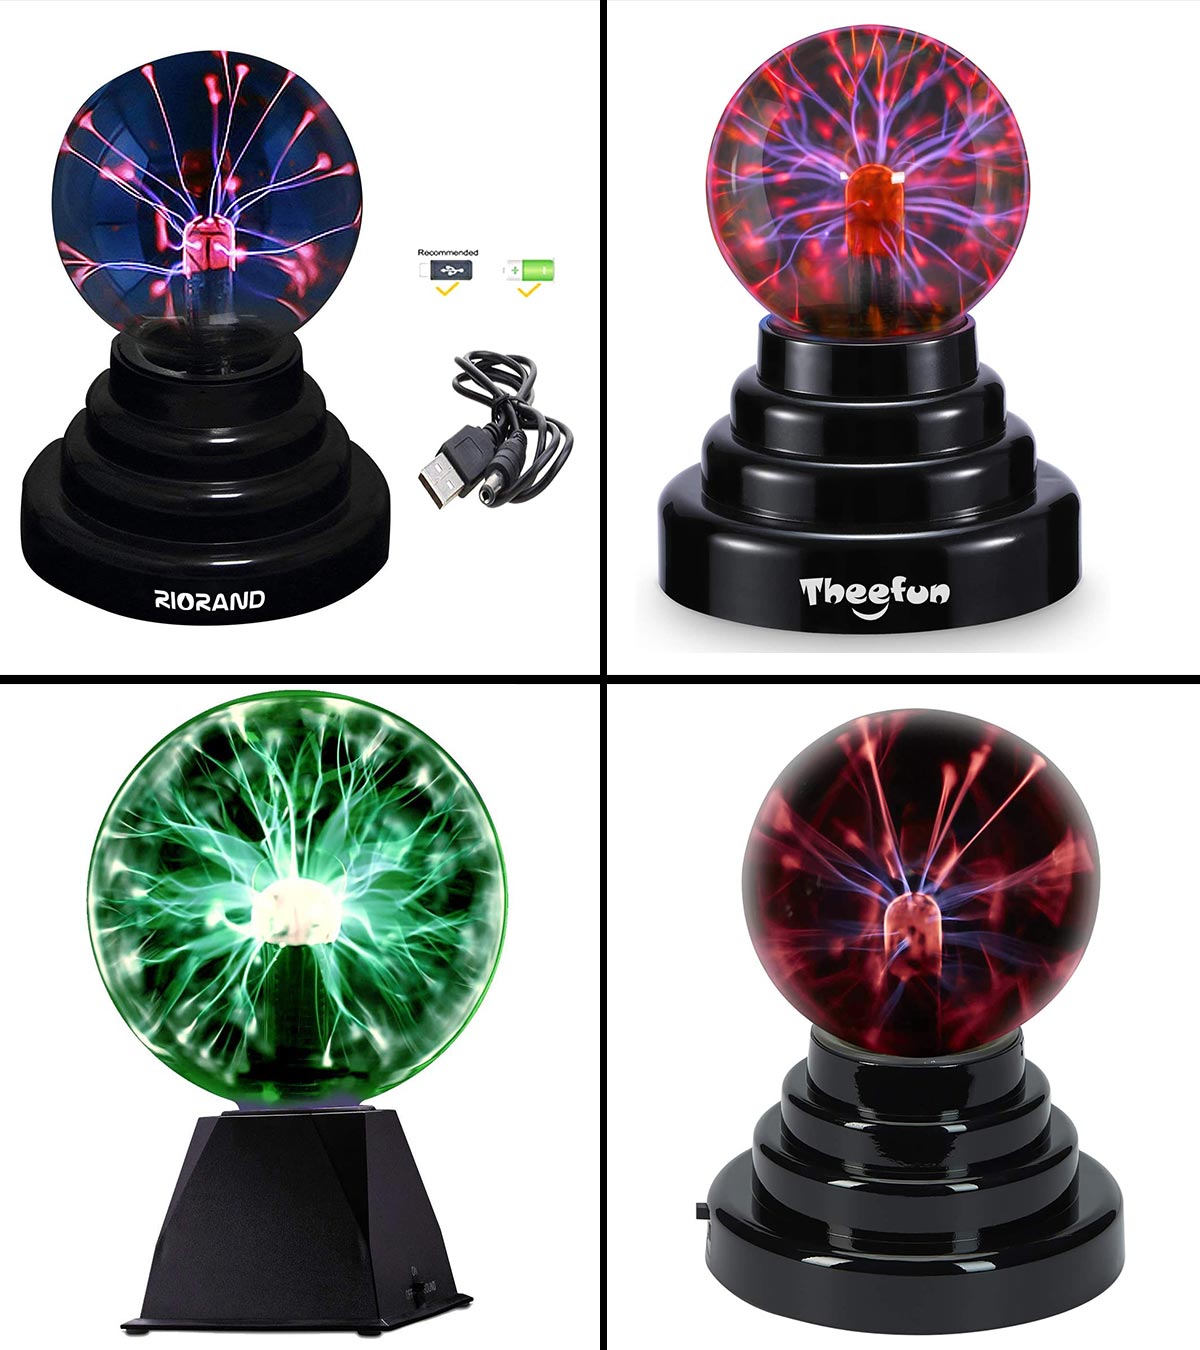 Electricity Ball Tesla Ball Static Ball Plasma Lamp Plasma Ball Touch Sensitive Plasma Globe Cool Stuff for Teens USB Port or Battery Powered for Parties,Decorations,Prop,Home 